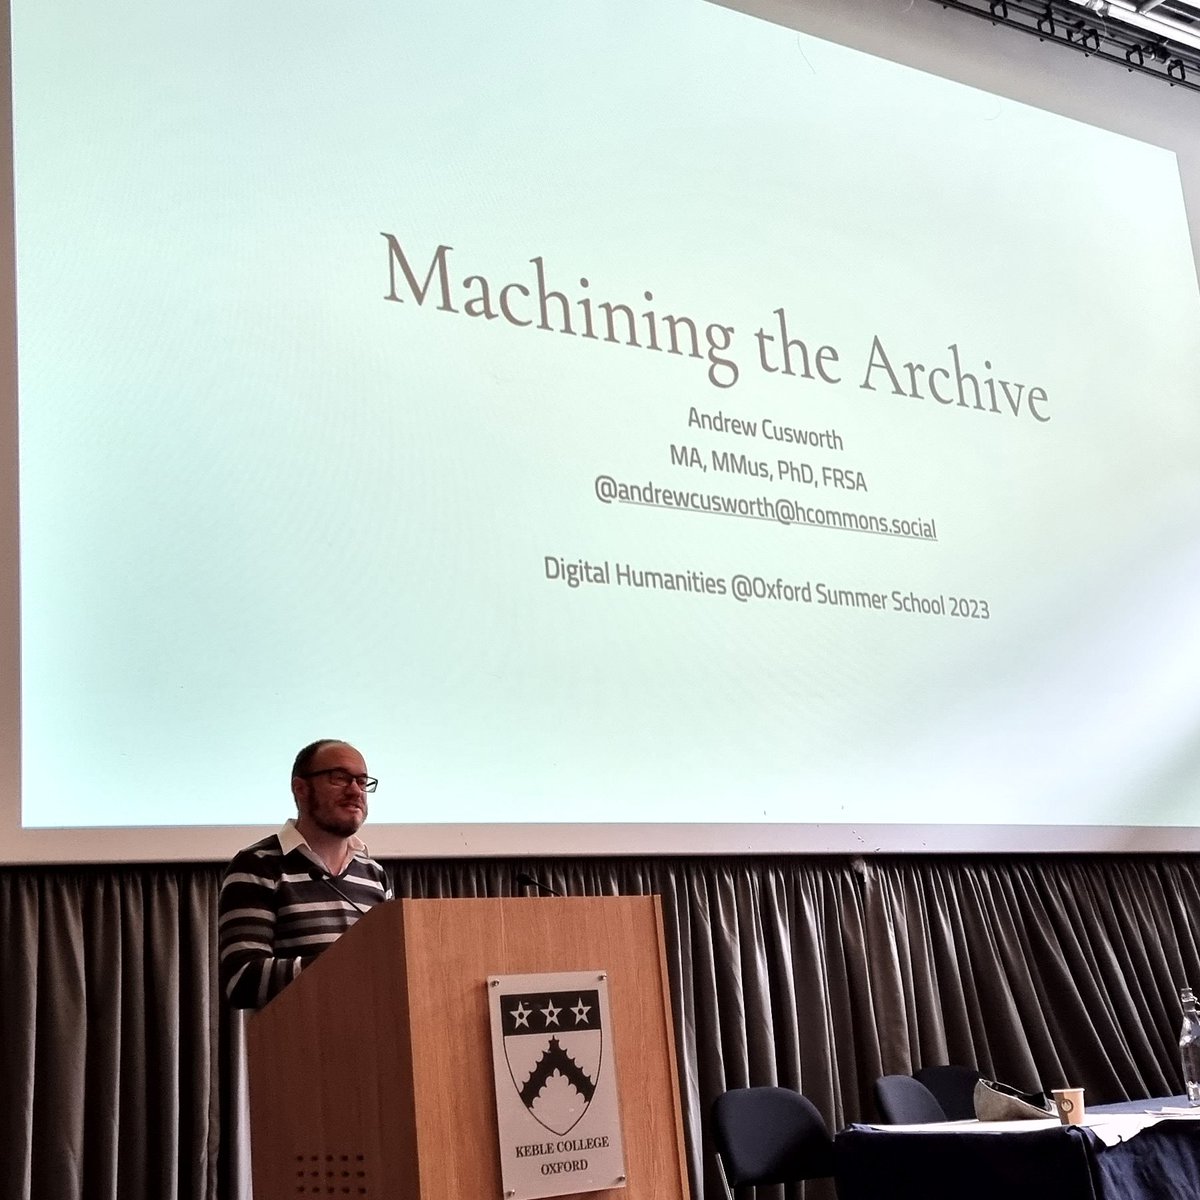 Day 3 here at #DHOxSS2023 One of the many joys of organising the 'introduction to DH' with @agneatha is we get to invite the conveners from the other (9) workshops to speak - we open with @andrewcusworth, convener of When Archives Become Digital - always thoughtful & insightful.